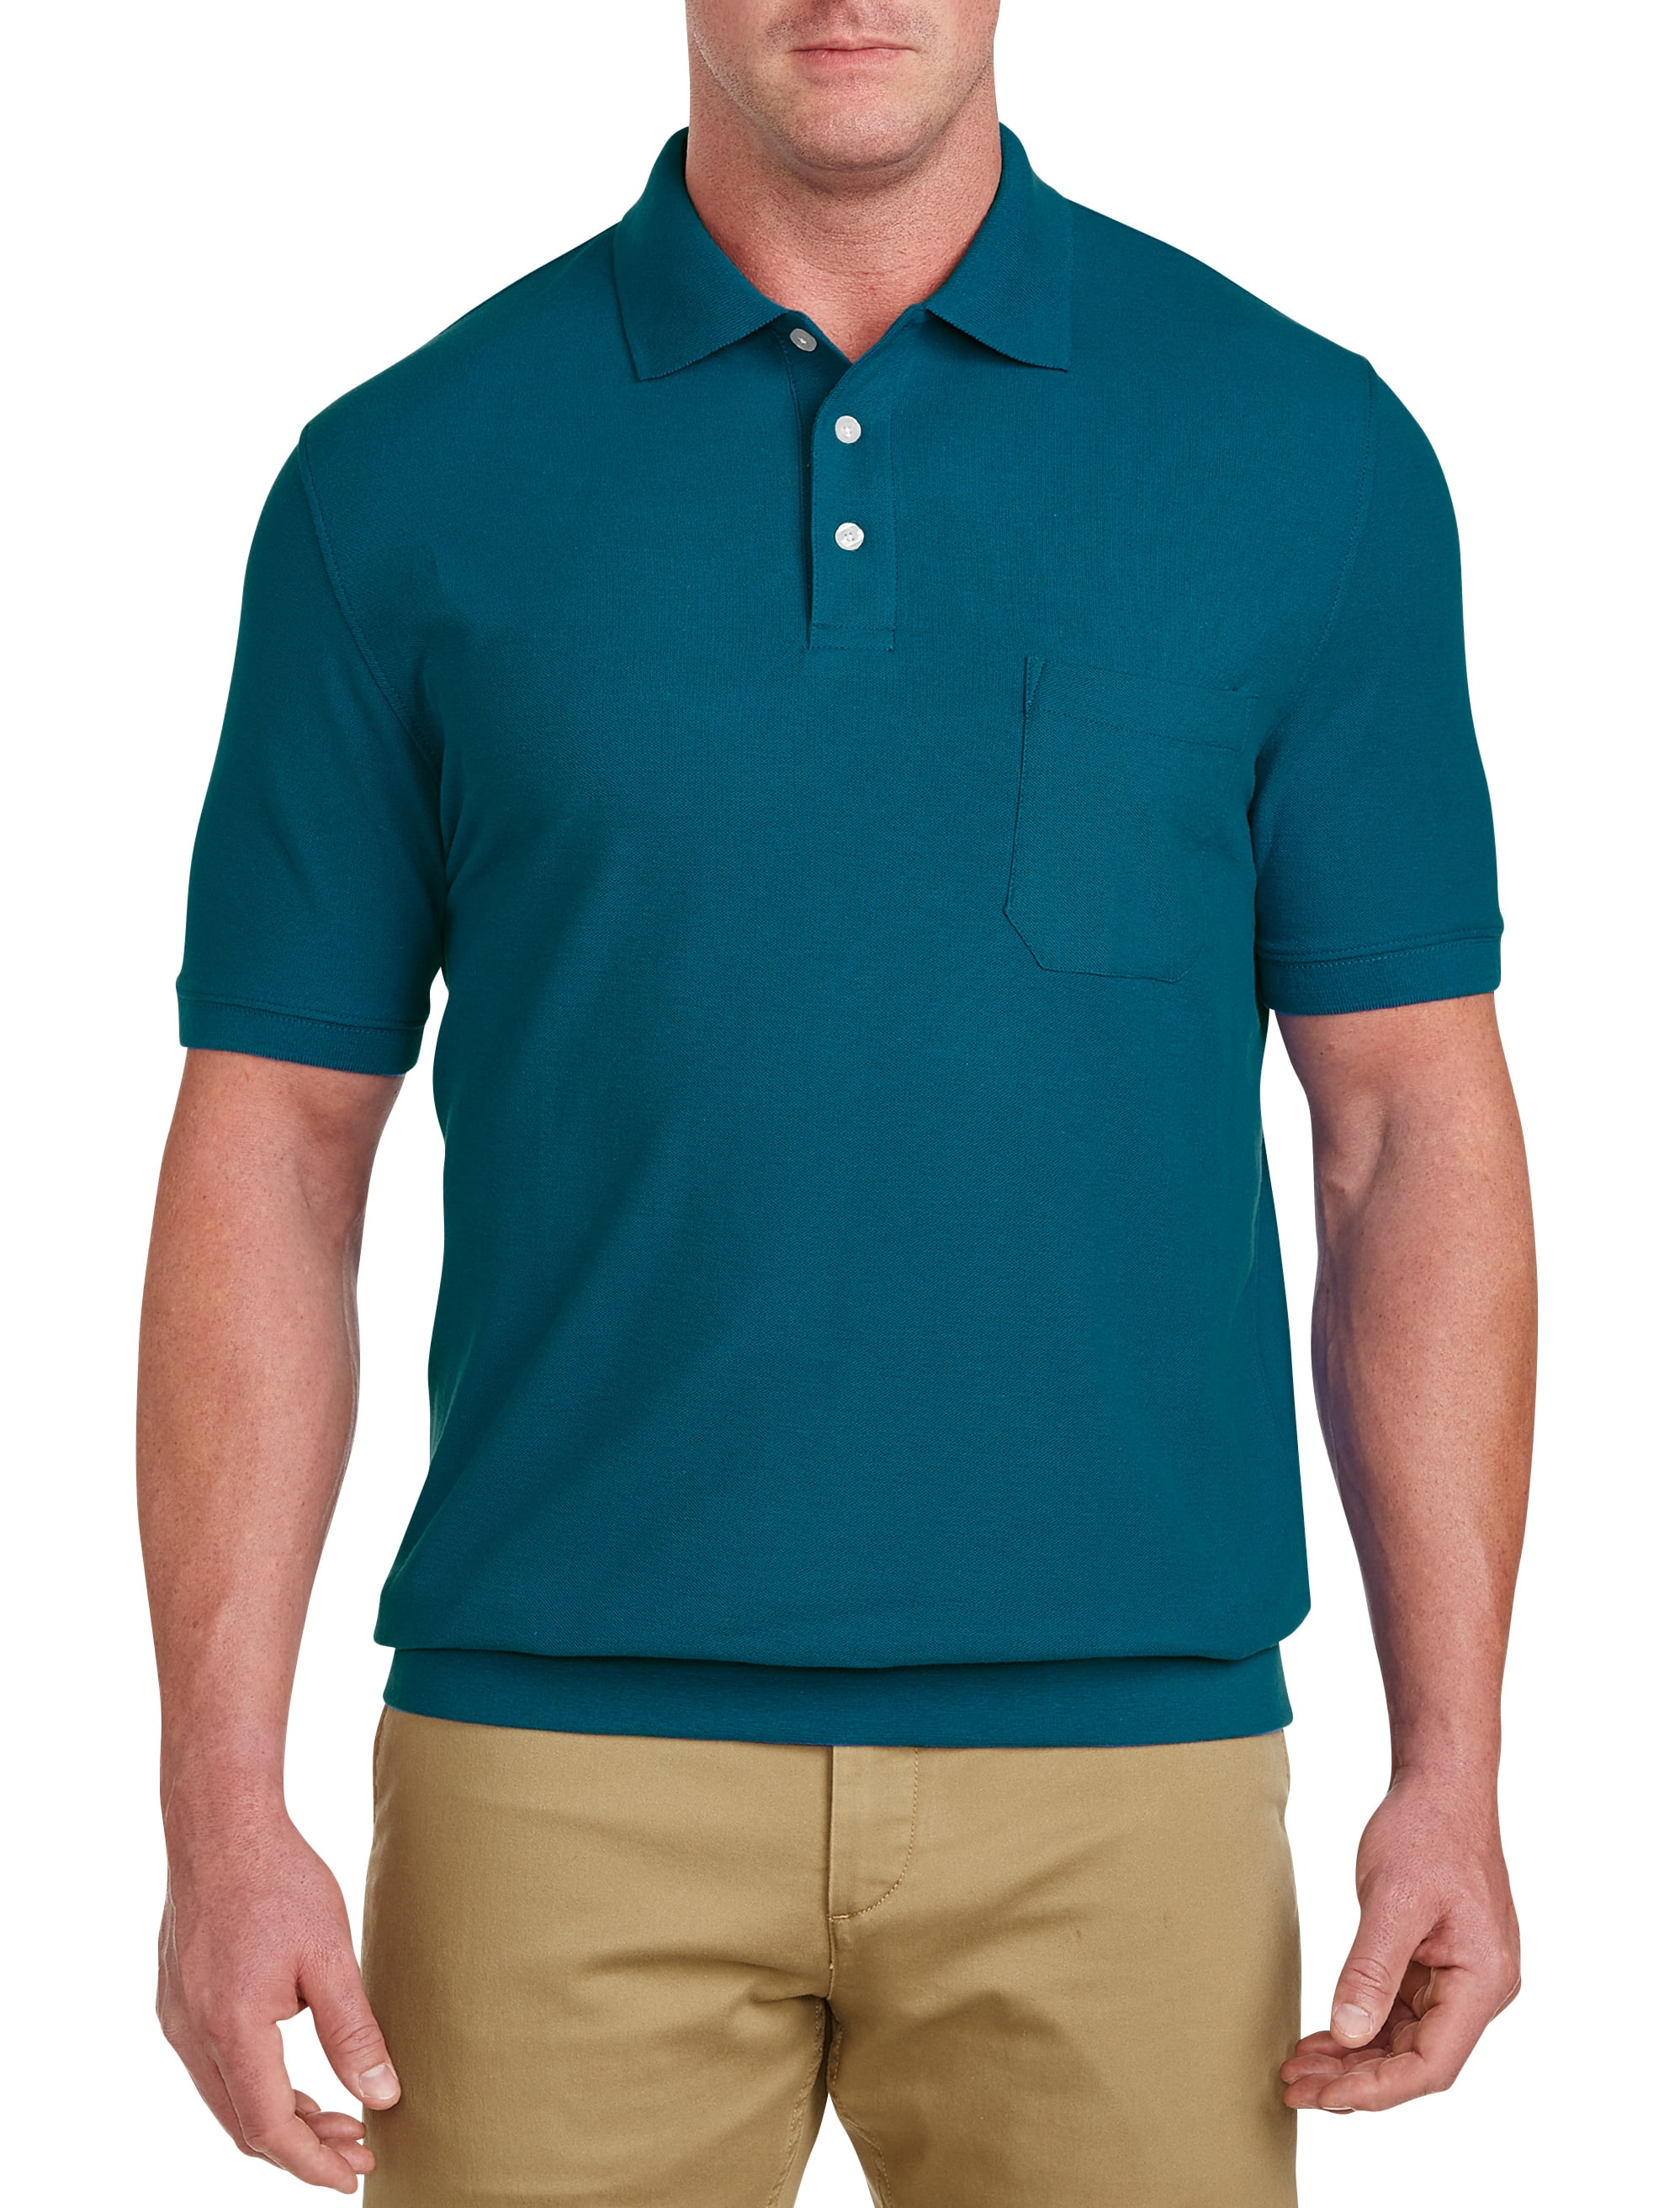 Harbor Bay by DXL Big and Tall Men's Banded-Bottom Pique Polo Shirt ...